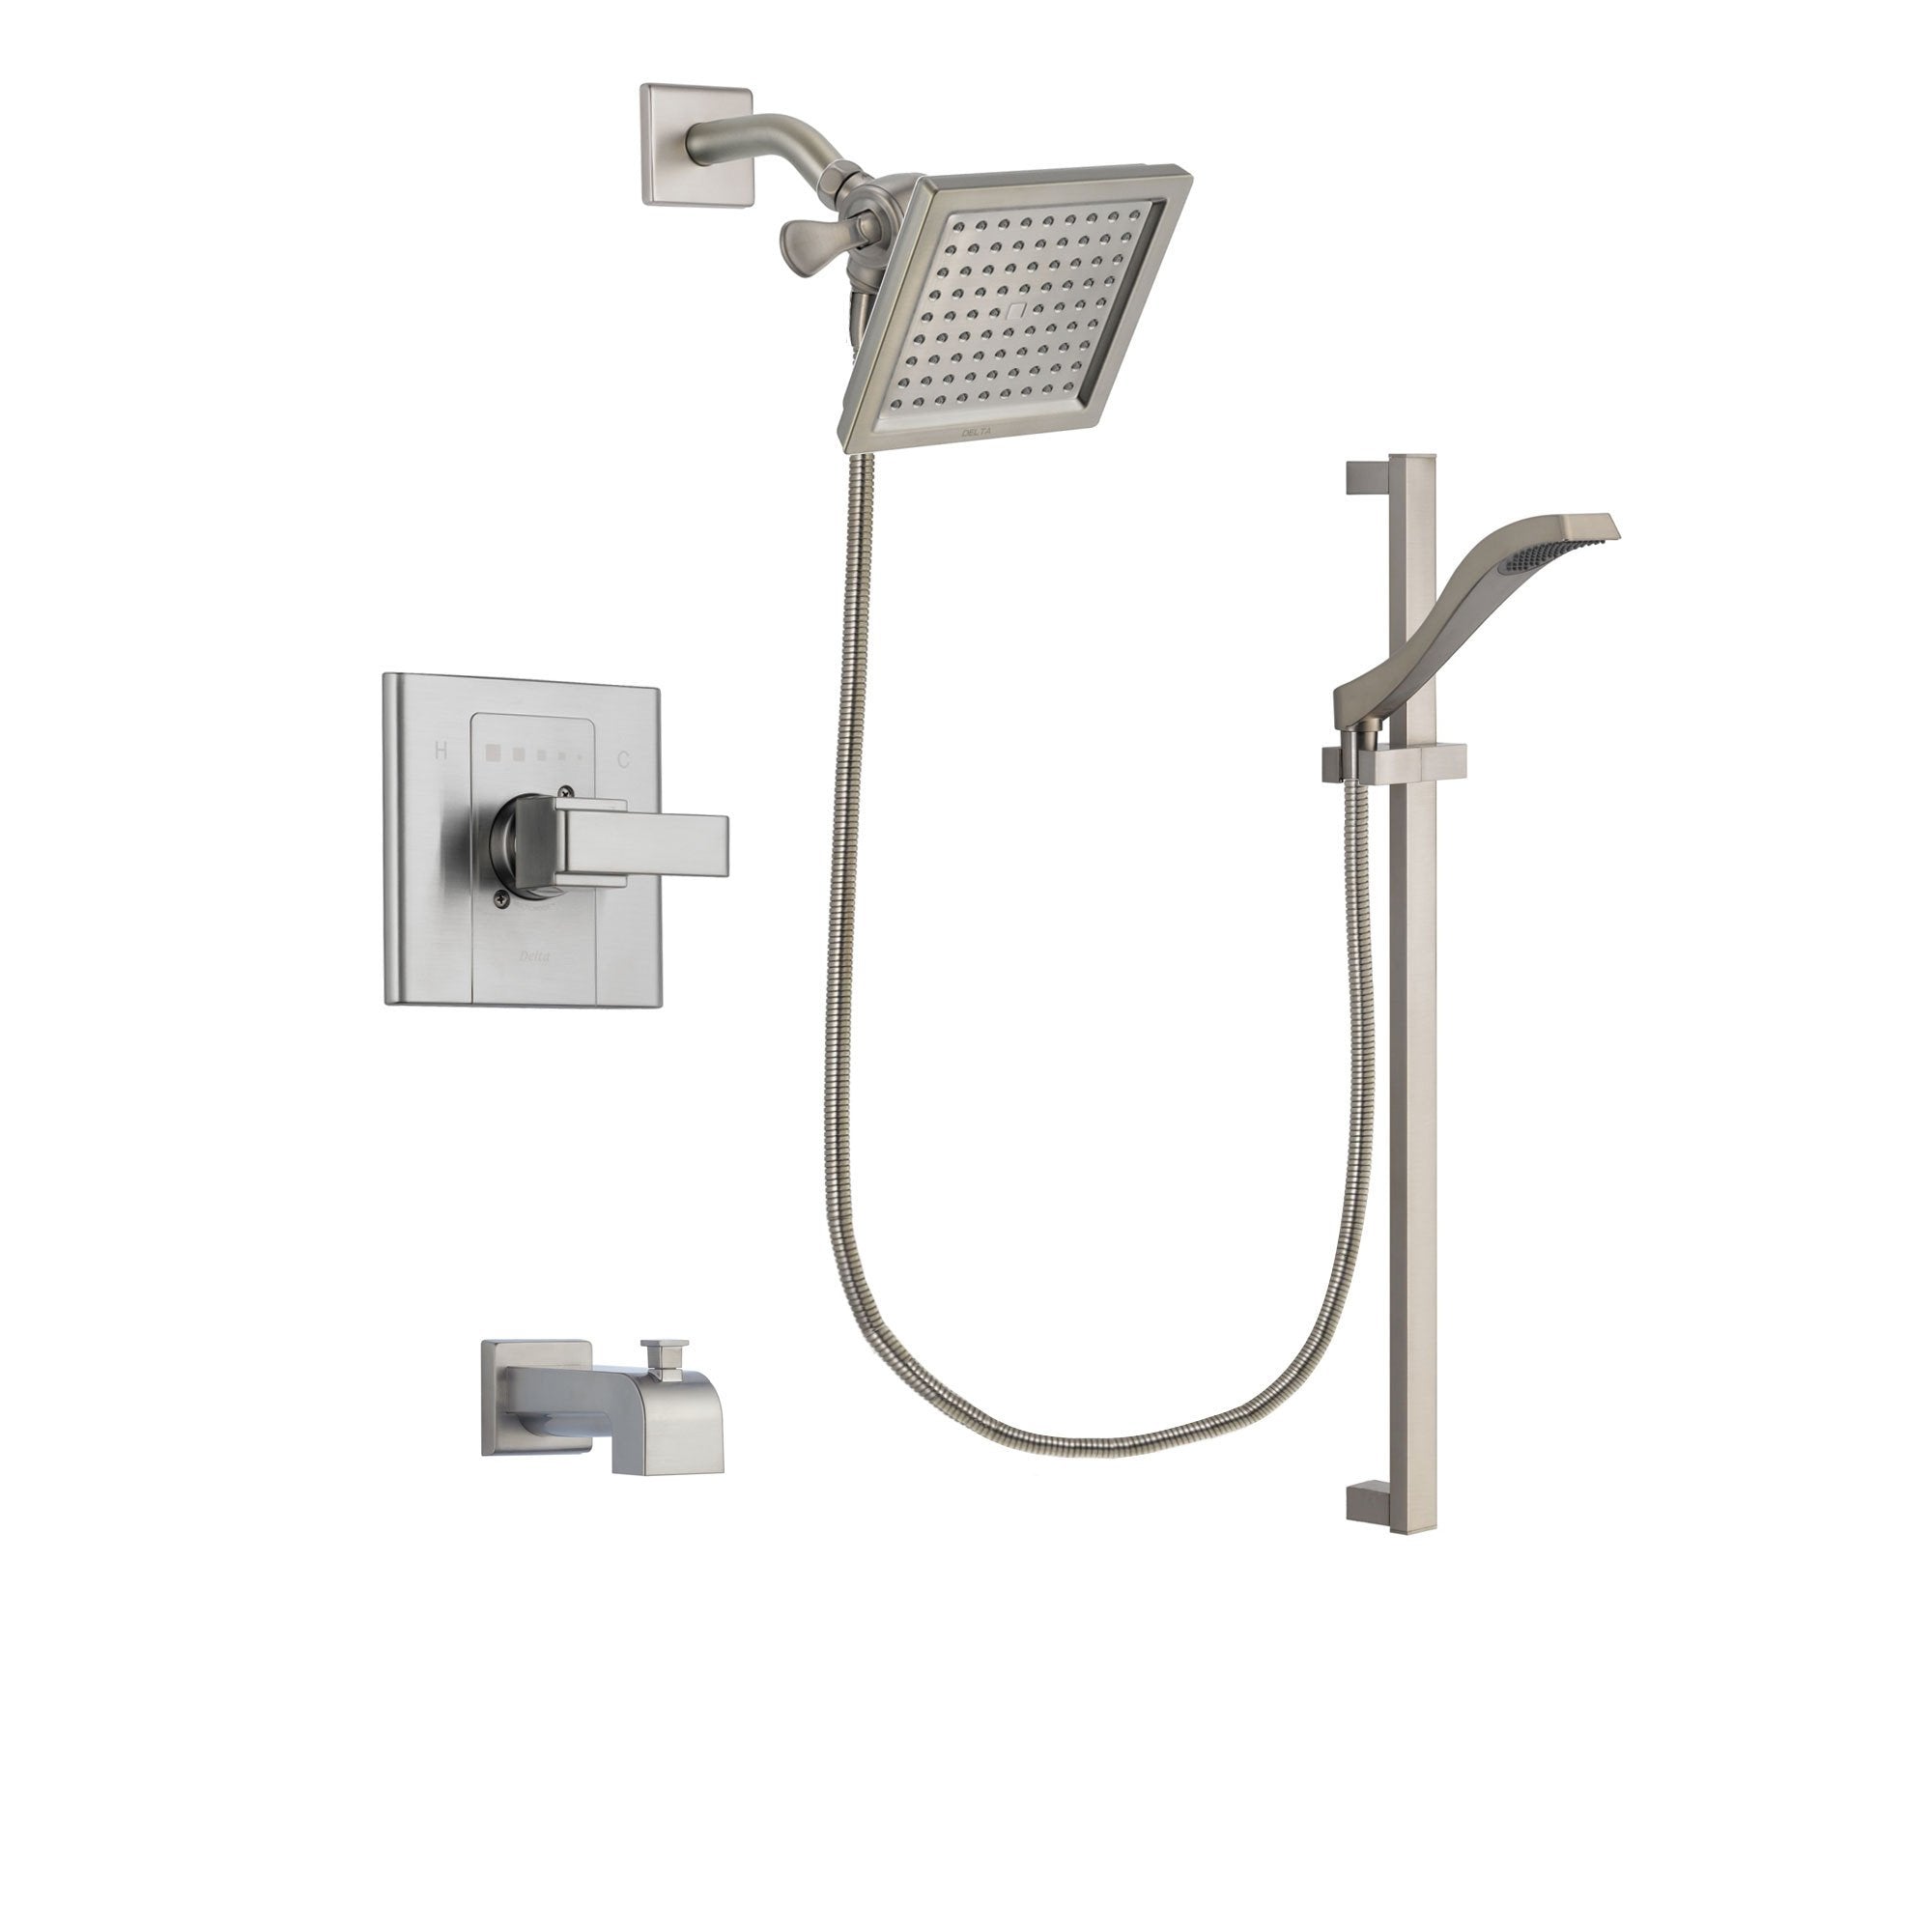 Delta Arzo Stainless Steel Finish Tub and Shower Faucet System Package with 6.5-inch Square Rain Showerhead and Handheld Shower with Slide Bar Includes Rough-in Valve and Tub Spout DSP2247V